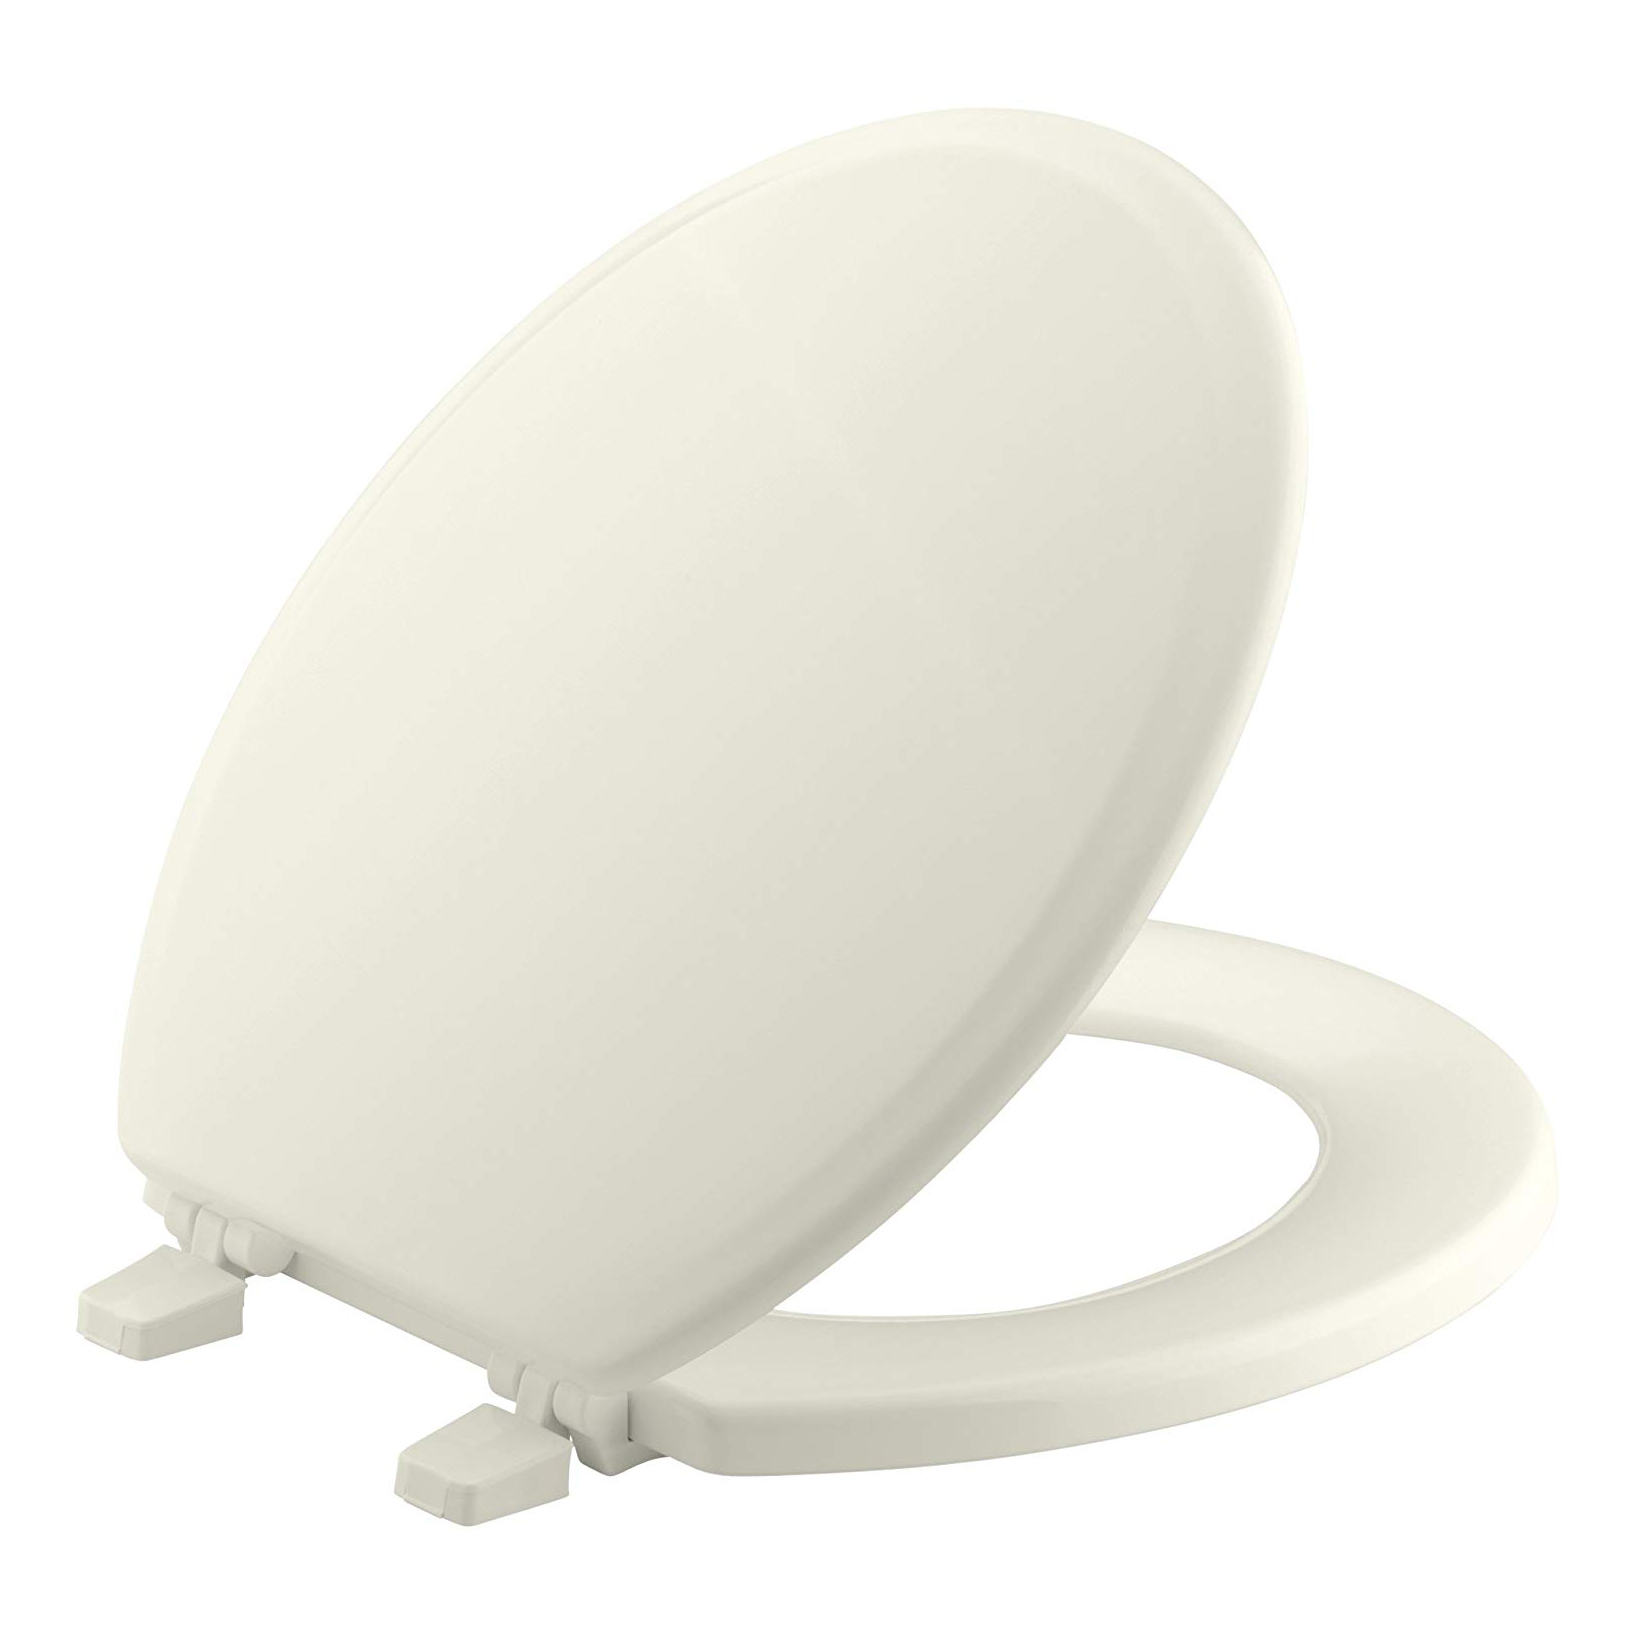 Ridgewood Closed Front Elongated Toilet Seat in Biscuit